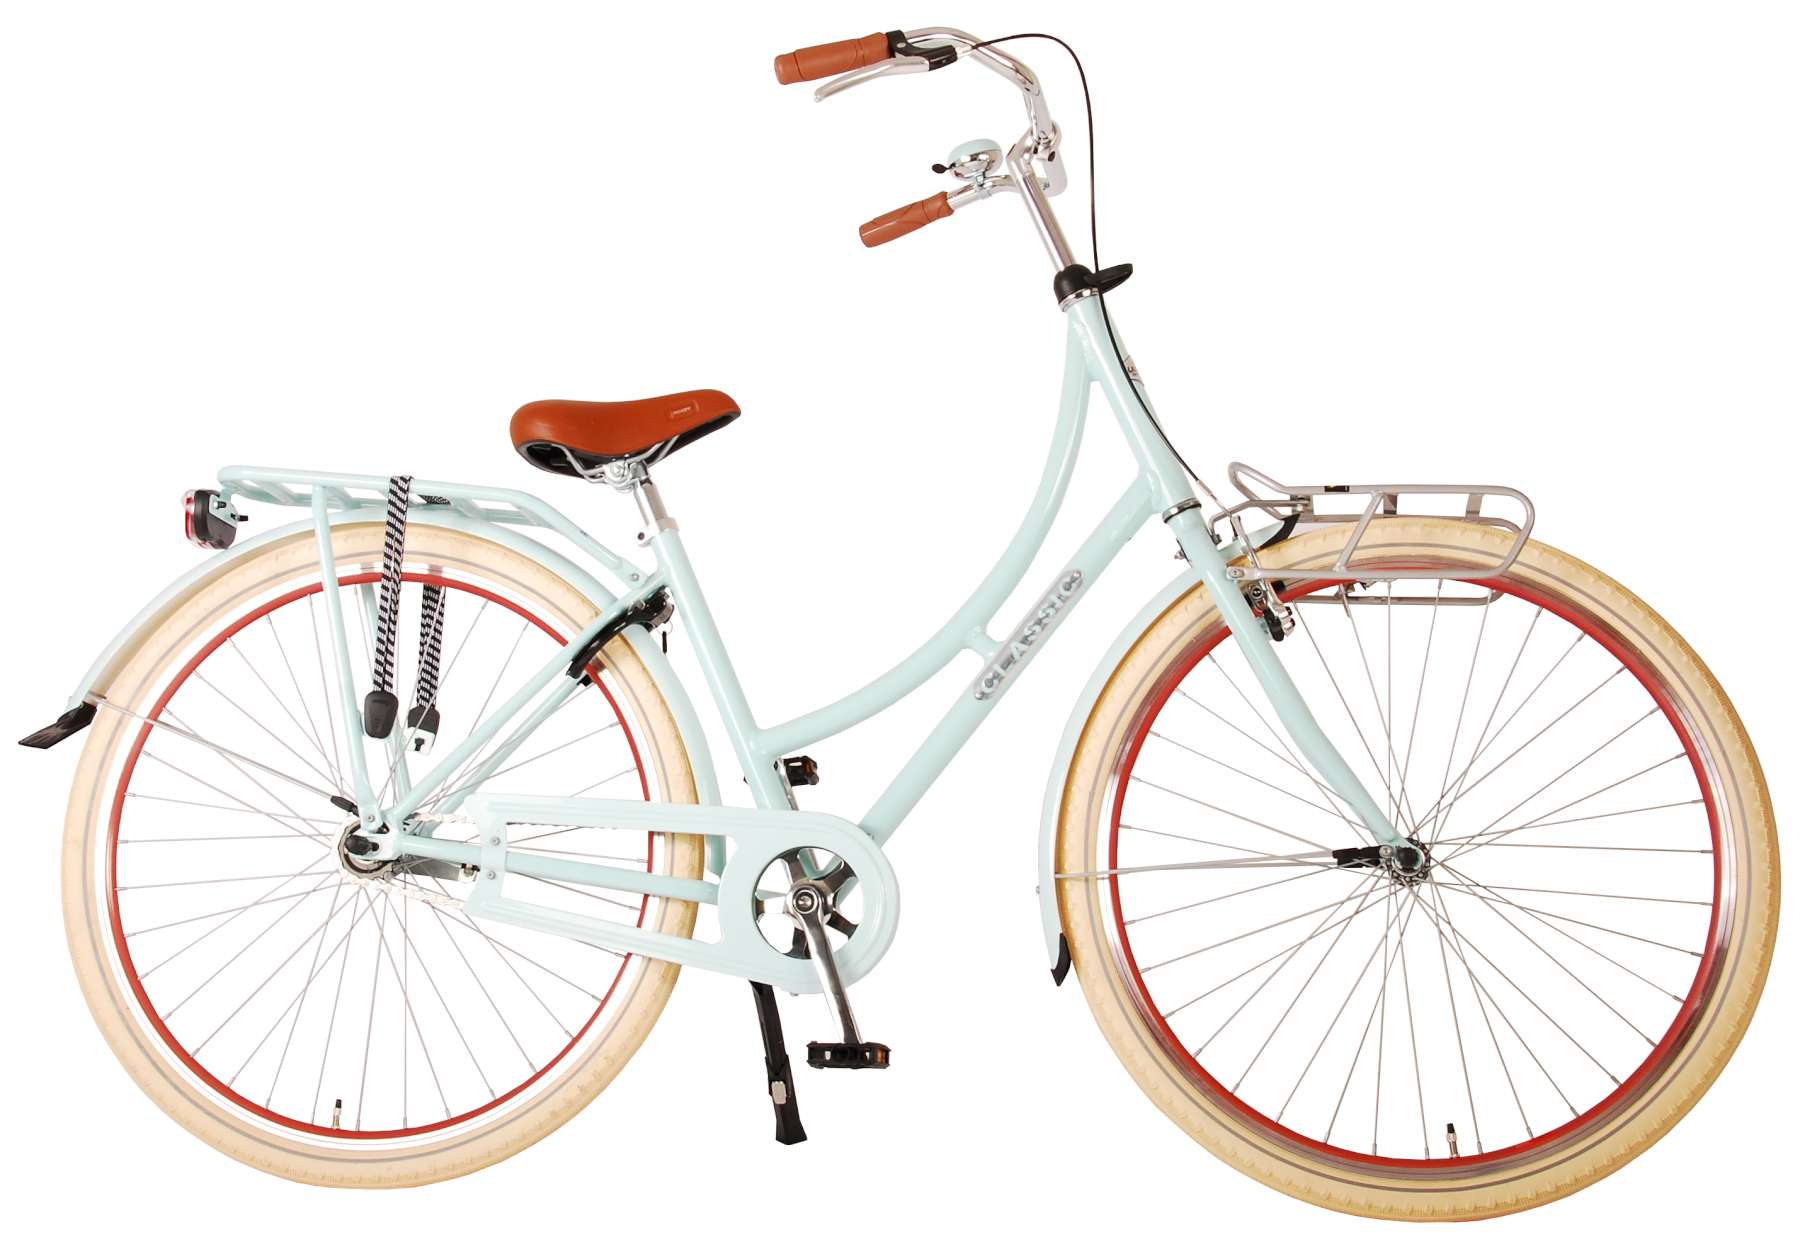 Volare Clasic Omafiets RN Dames Omafiets Pastel Blue 51 Cm +€25 Inruilkorting